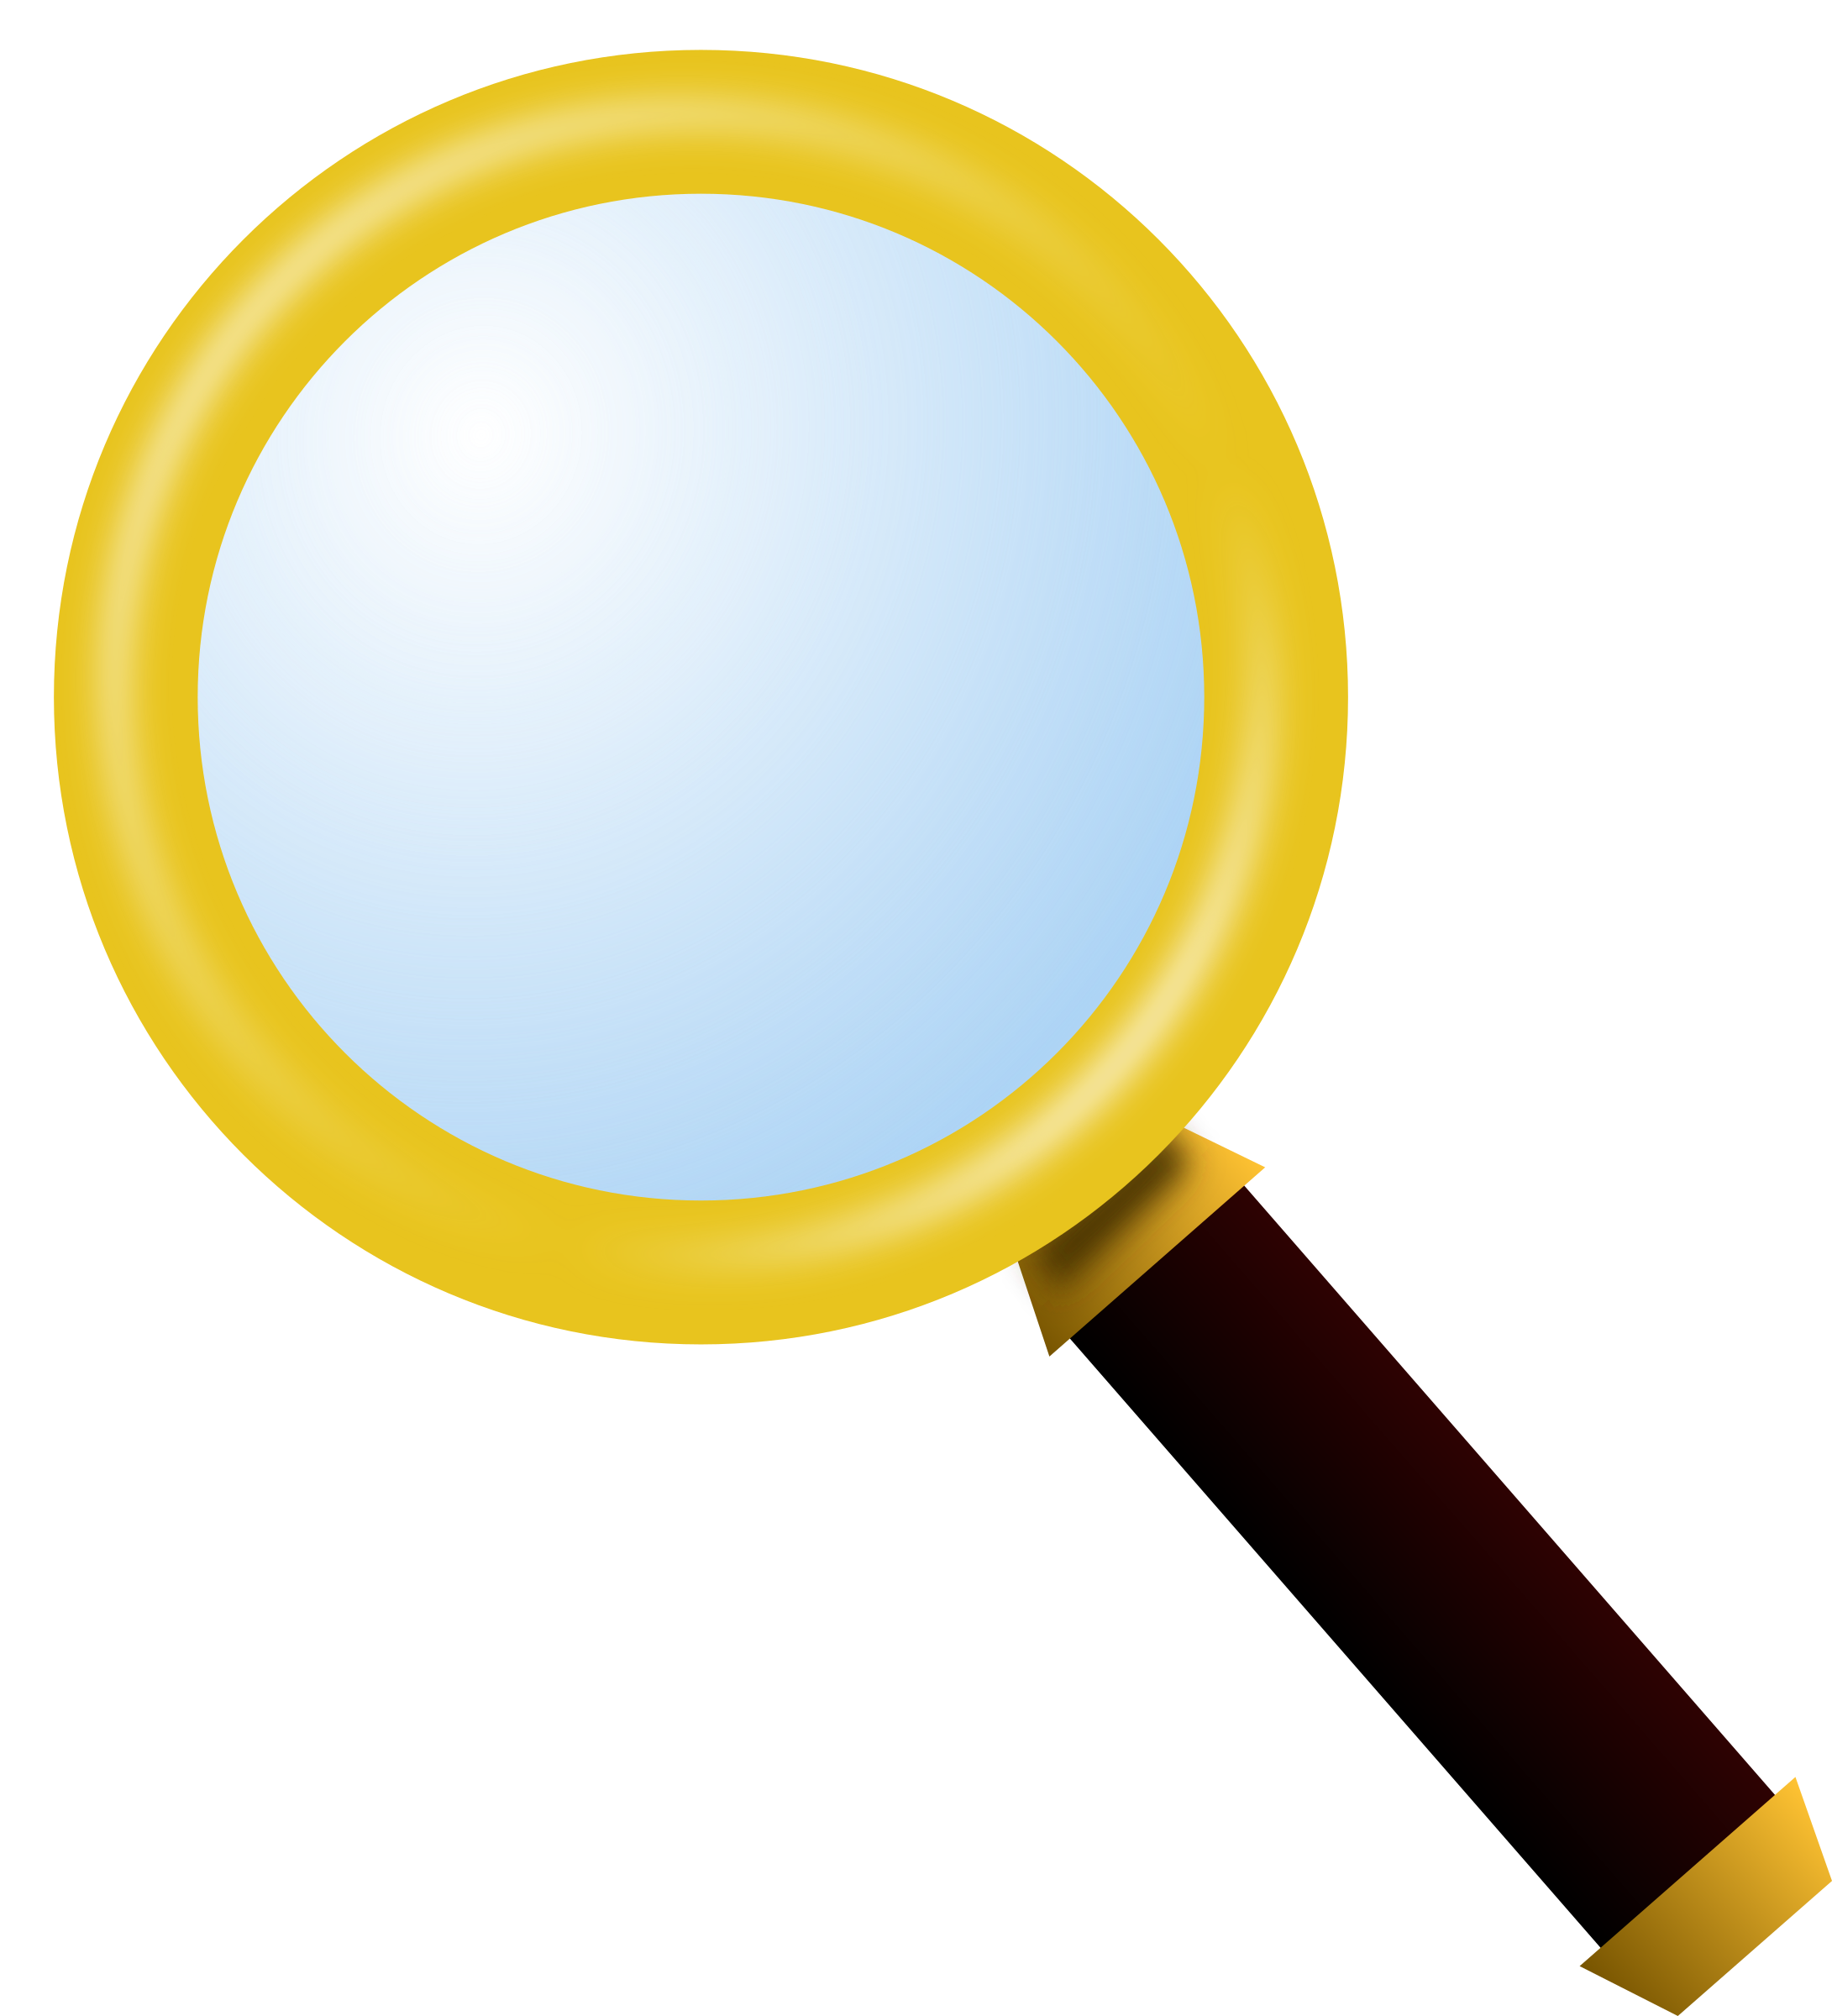 microsoft clipart magnifying glass - photo #38